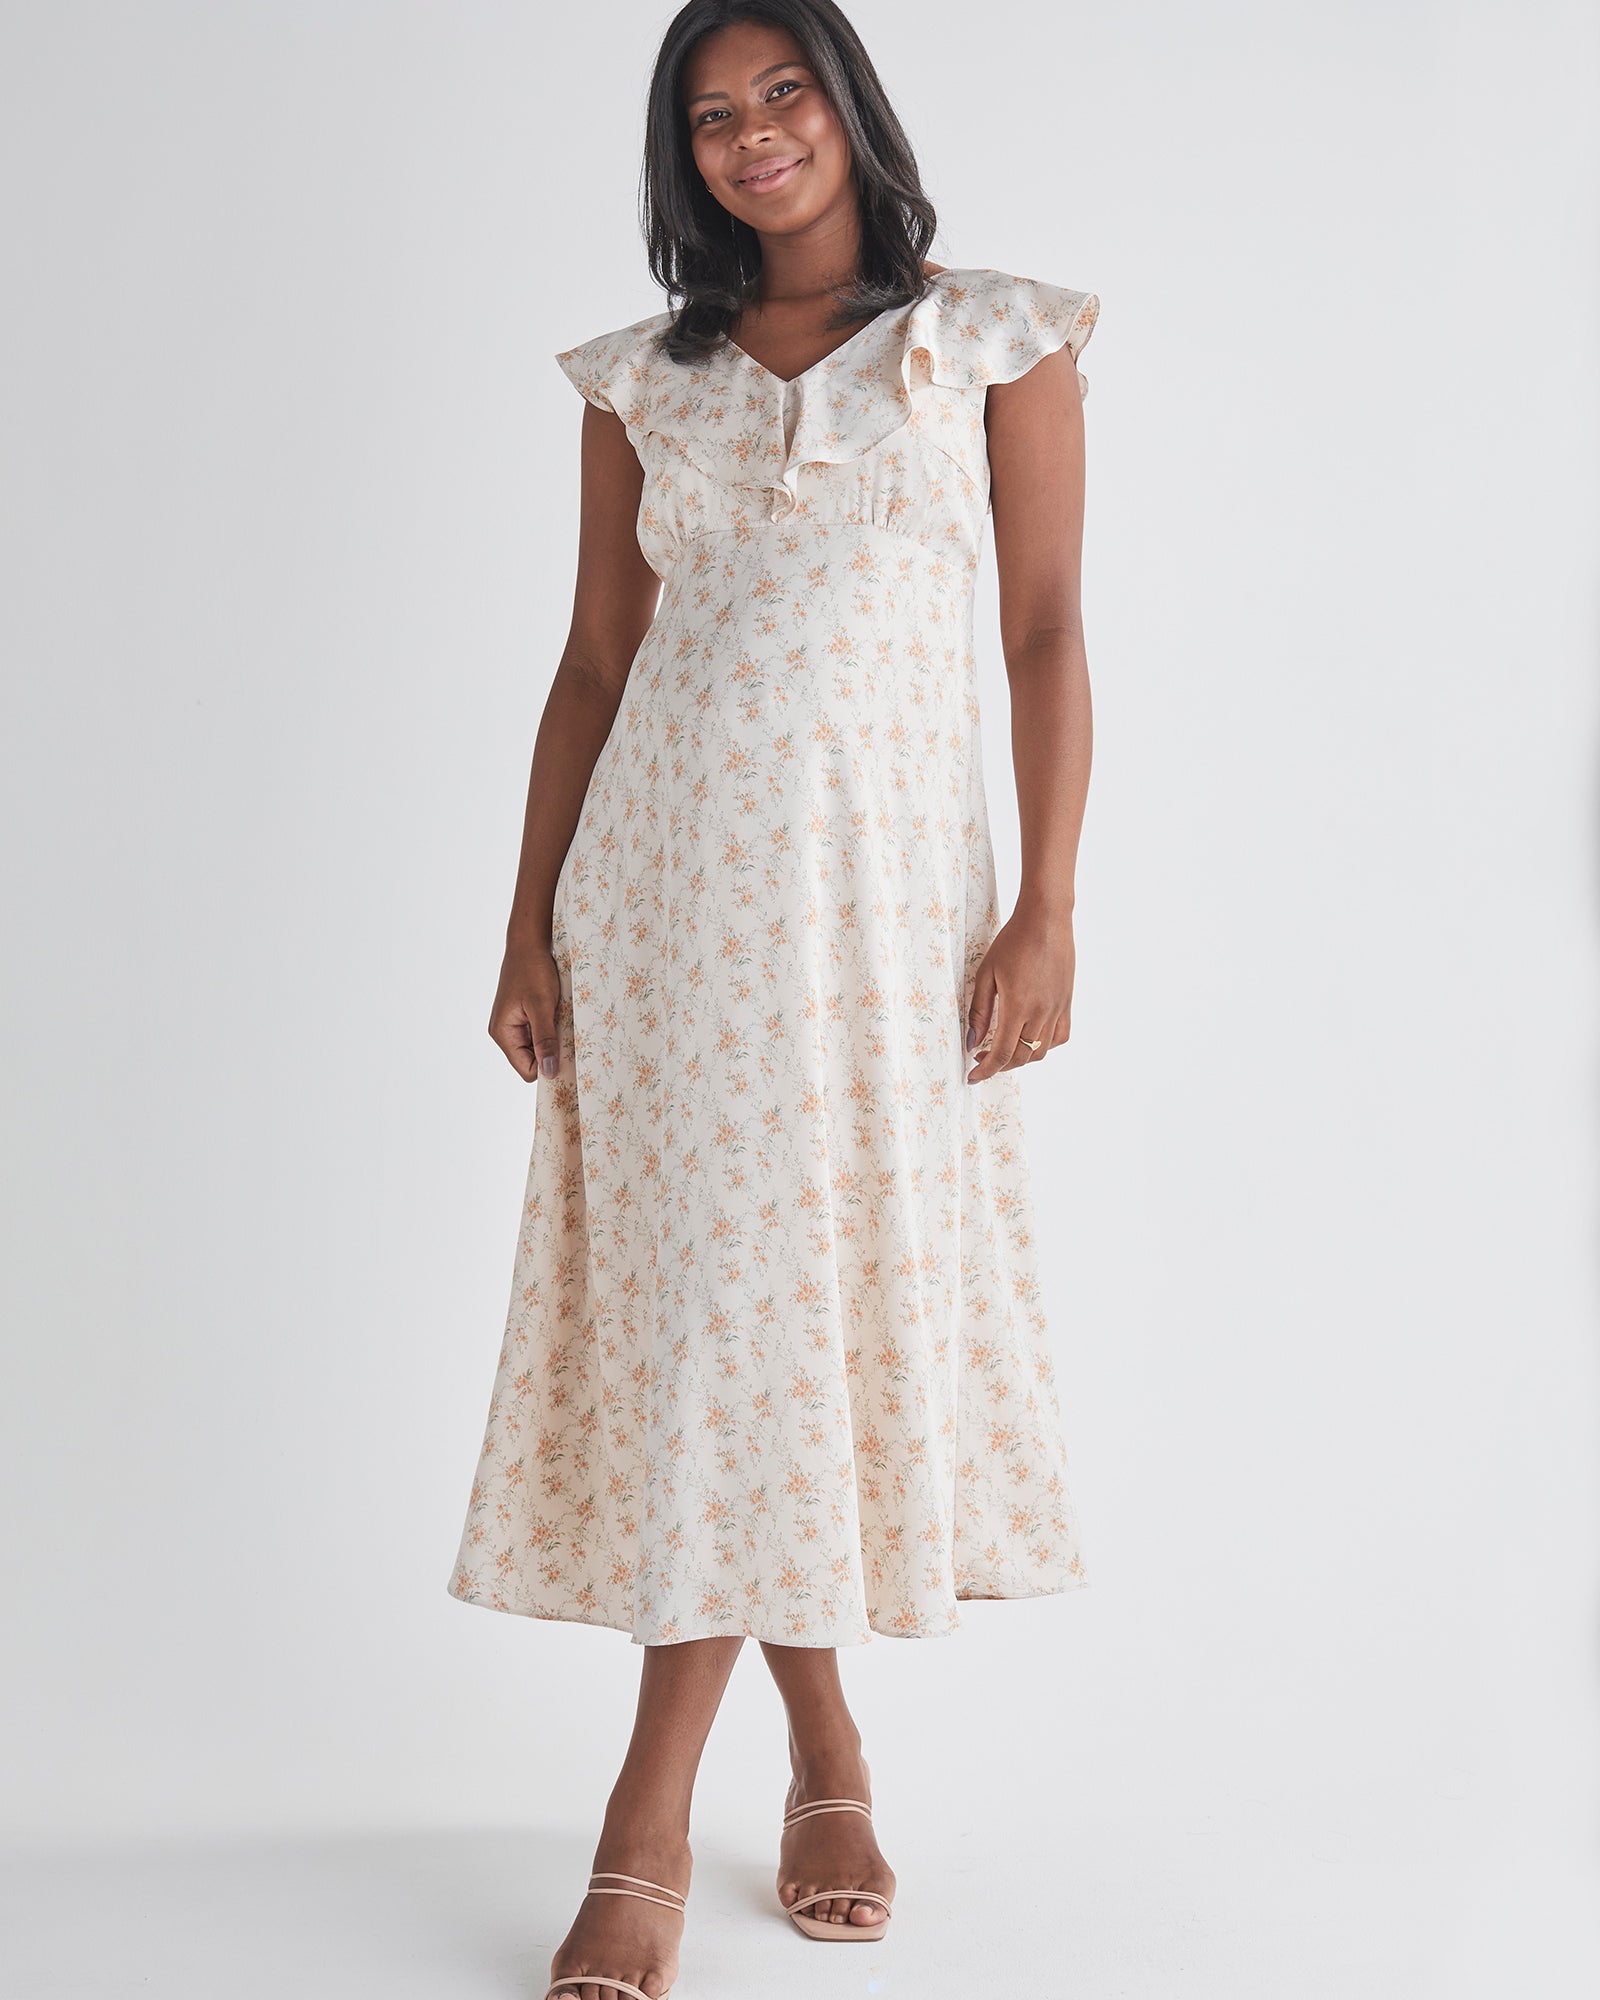 Main view-Delicate ruffle detail at neckline  - Smocked, stretch back for comfort  - Midi length A-line - Lined top fron Angel Maternity